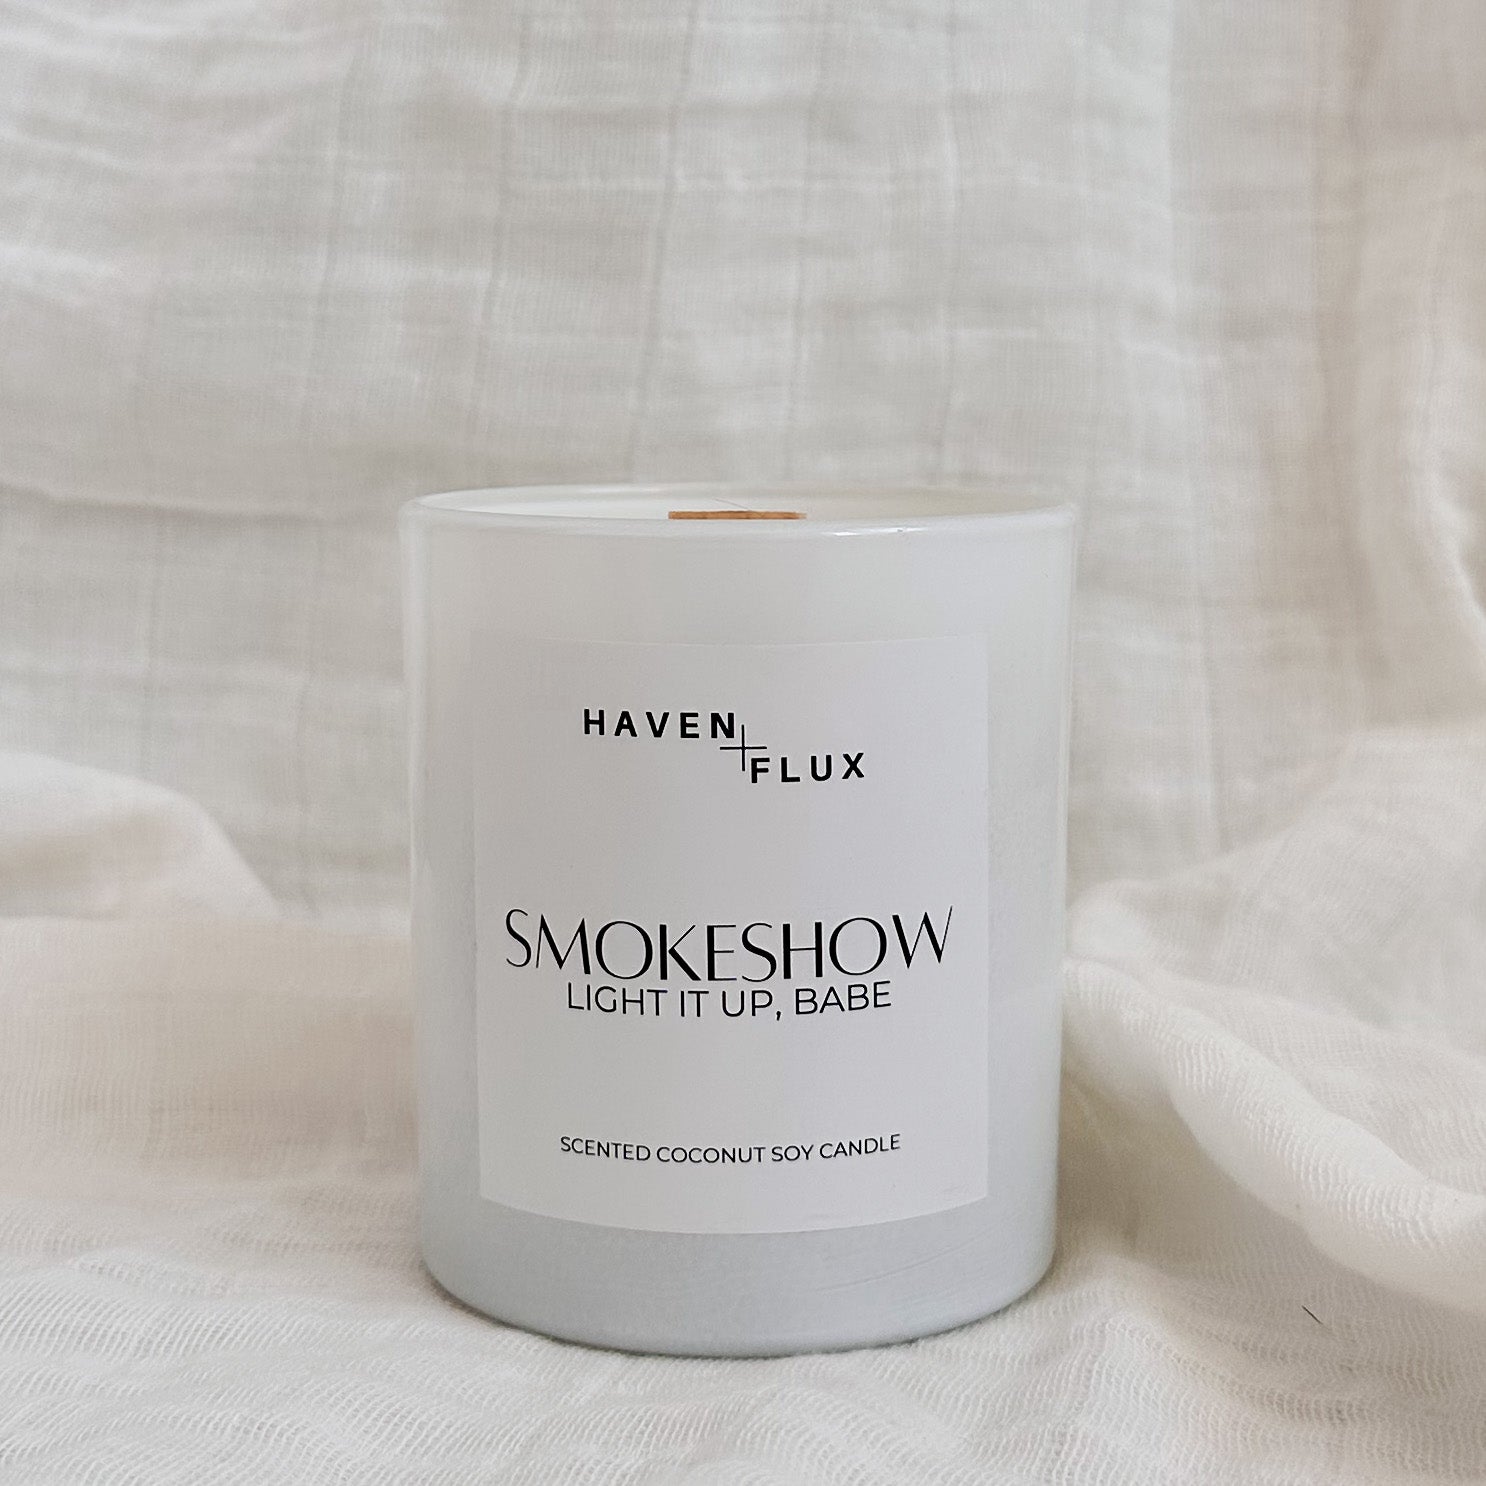 Non-Toxic Coconut Soy Wax Wooden Wick Smokeshow Light It Up, Babe Fall  Intention Candle for Mental Health